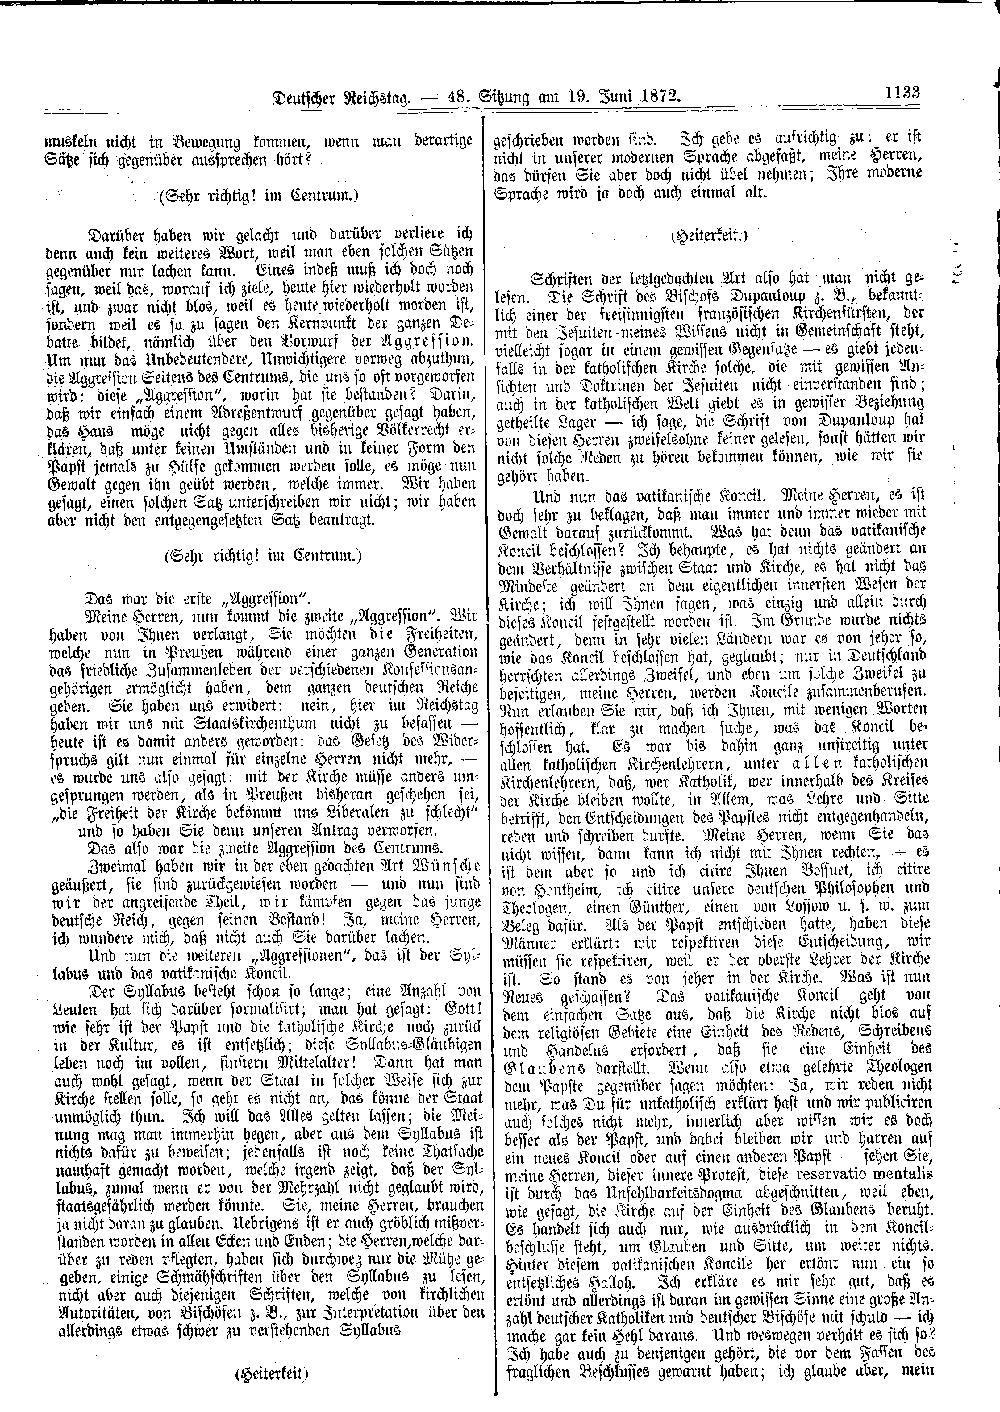 Scan of page 1133